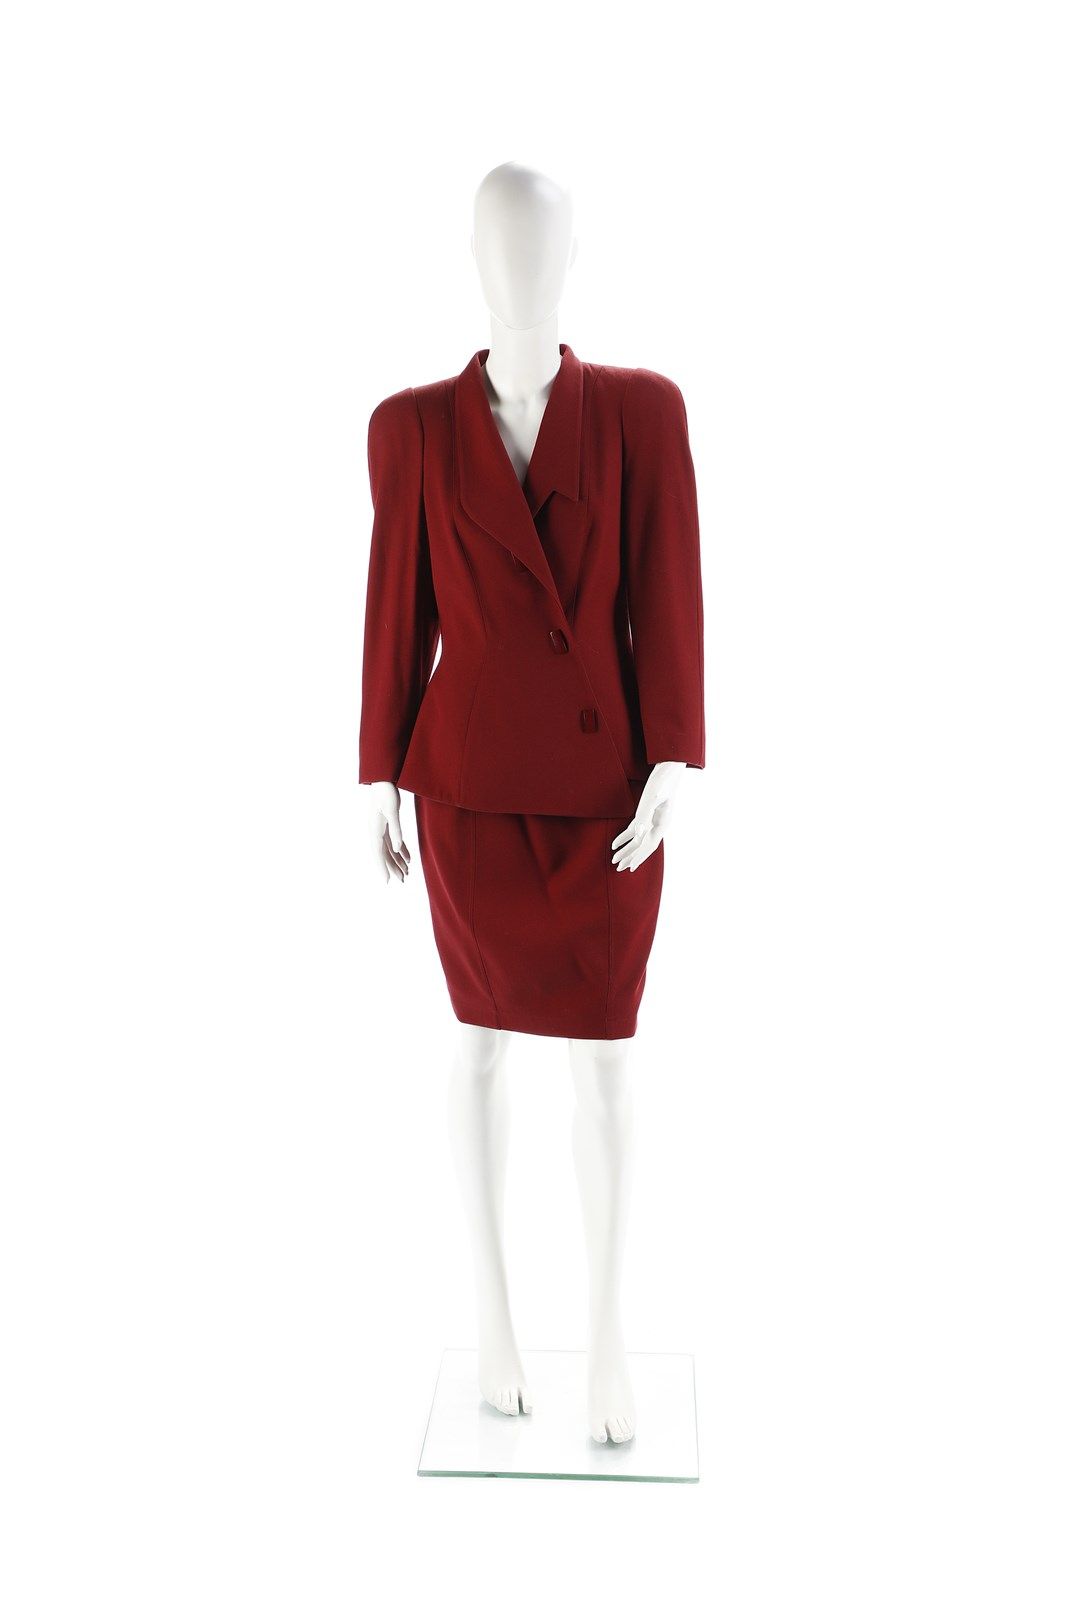 THIERRY MUGLER Suit consisting of jacket with diagonal button closure and burgun&hellip;